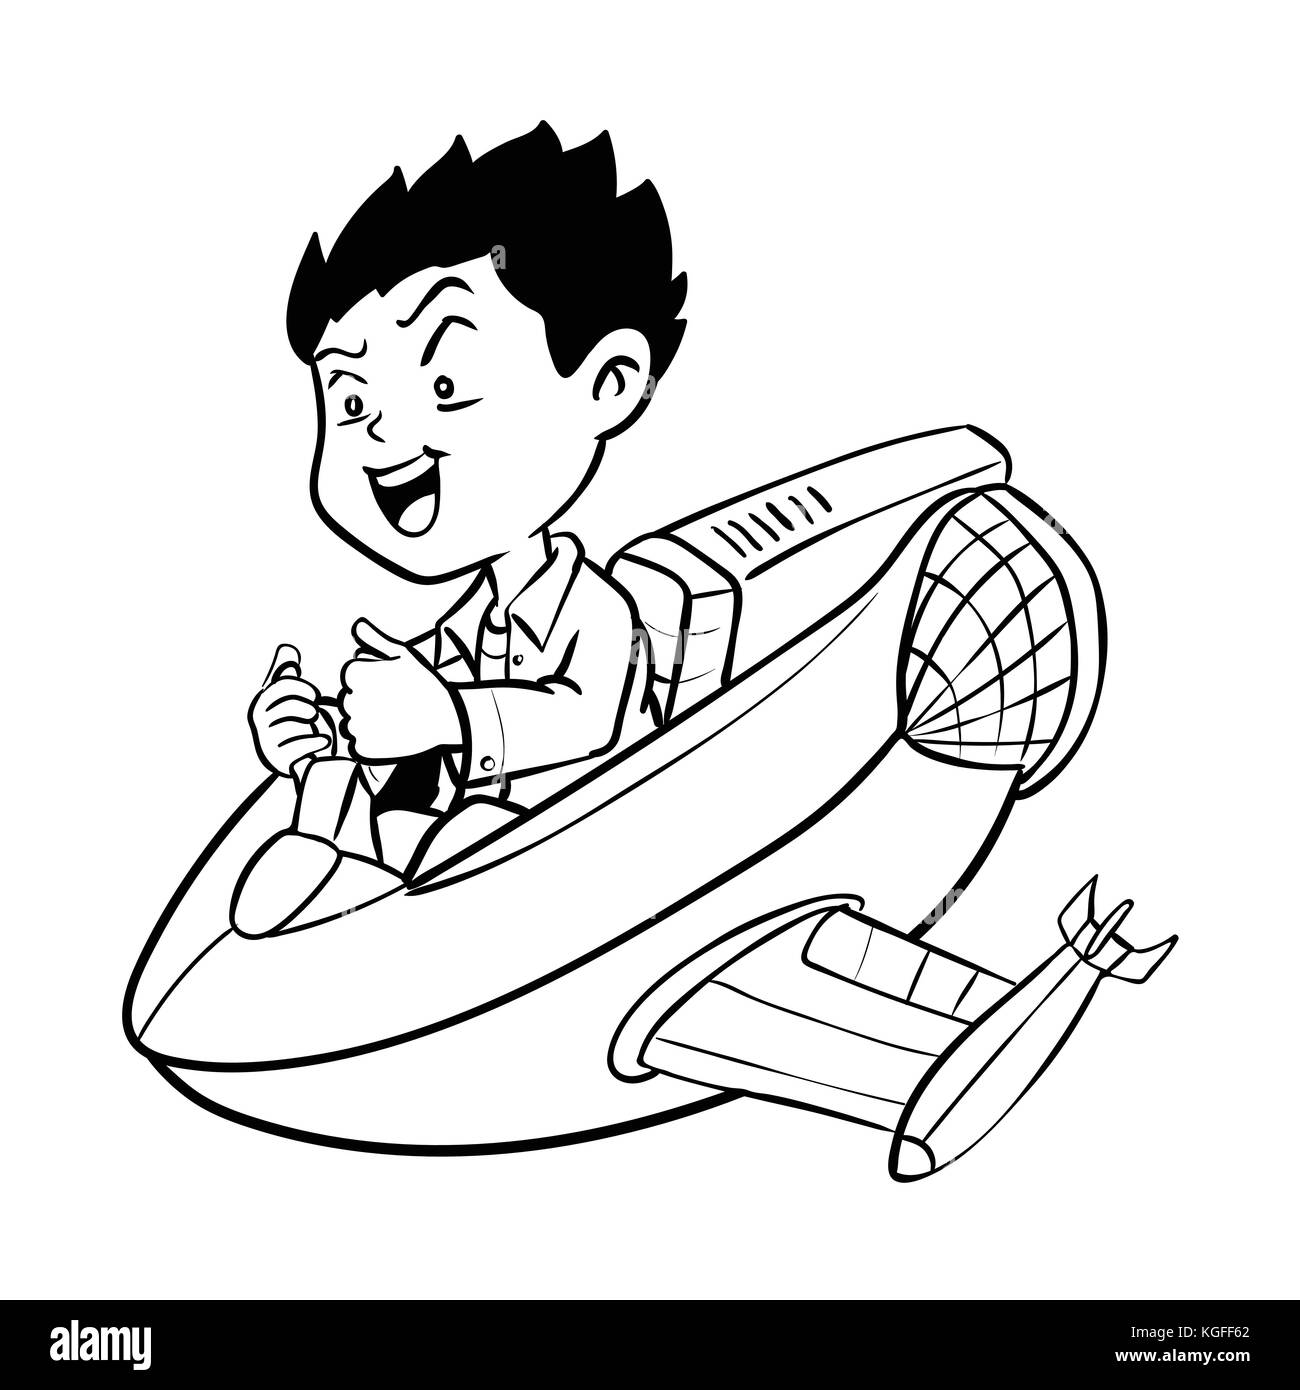 Hand drawn Boy drive aircraft, Cartoon with Victory sign, Isolated on white background. Black and White simple line Vector Illustration for Coloring B Stock Vector